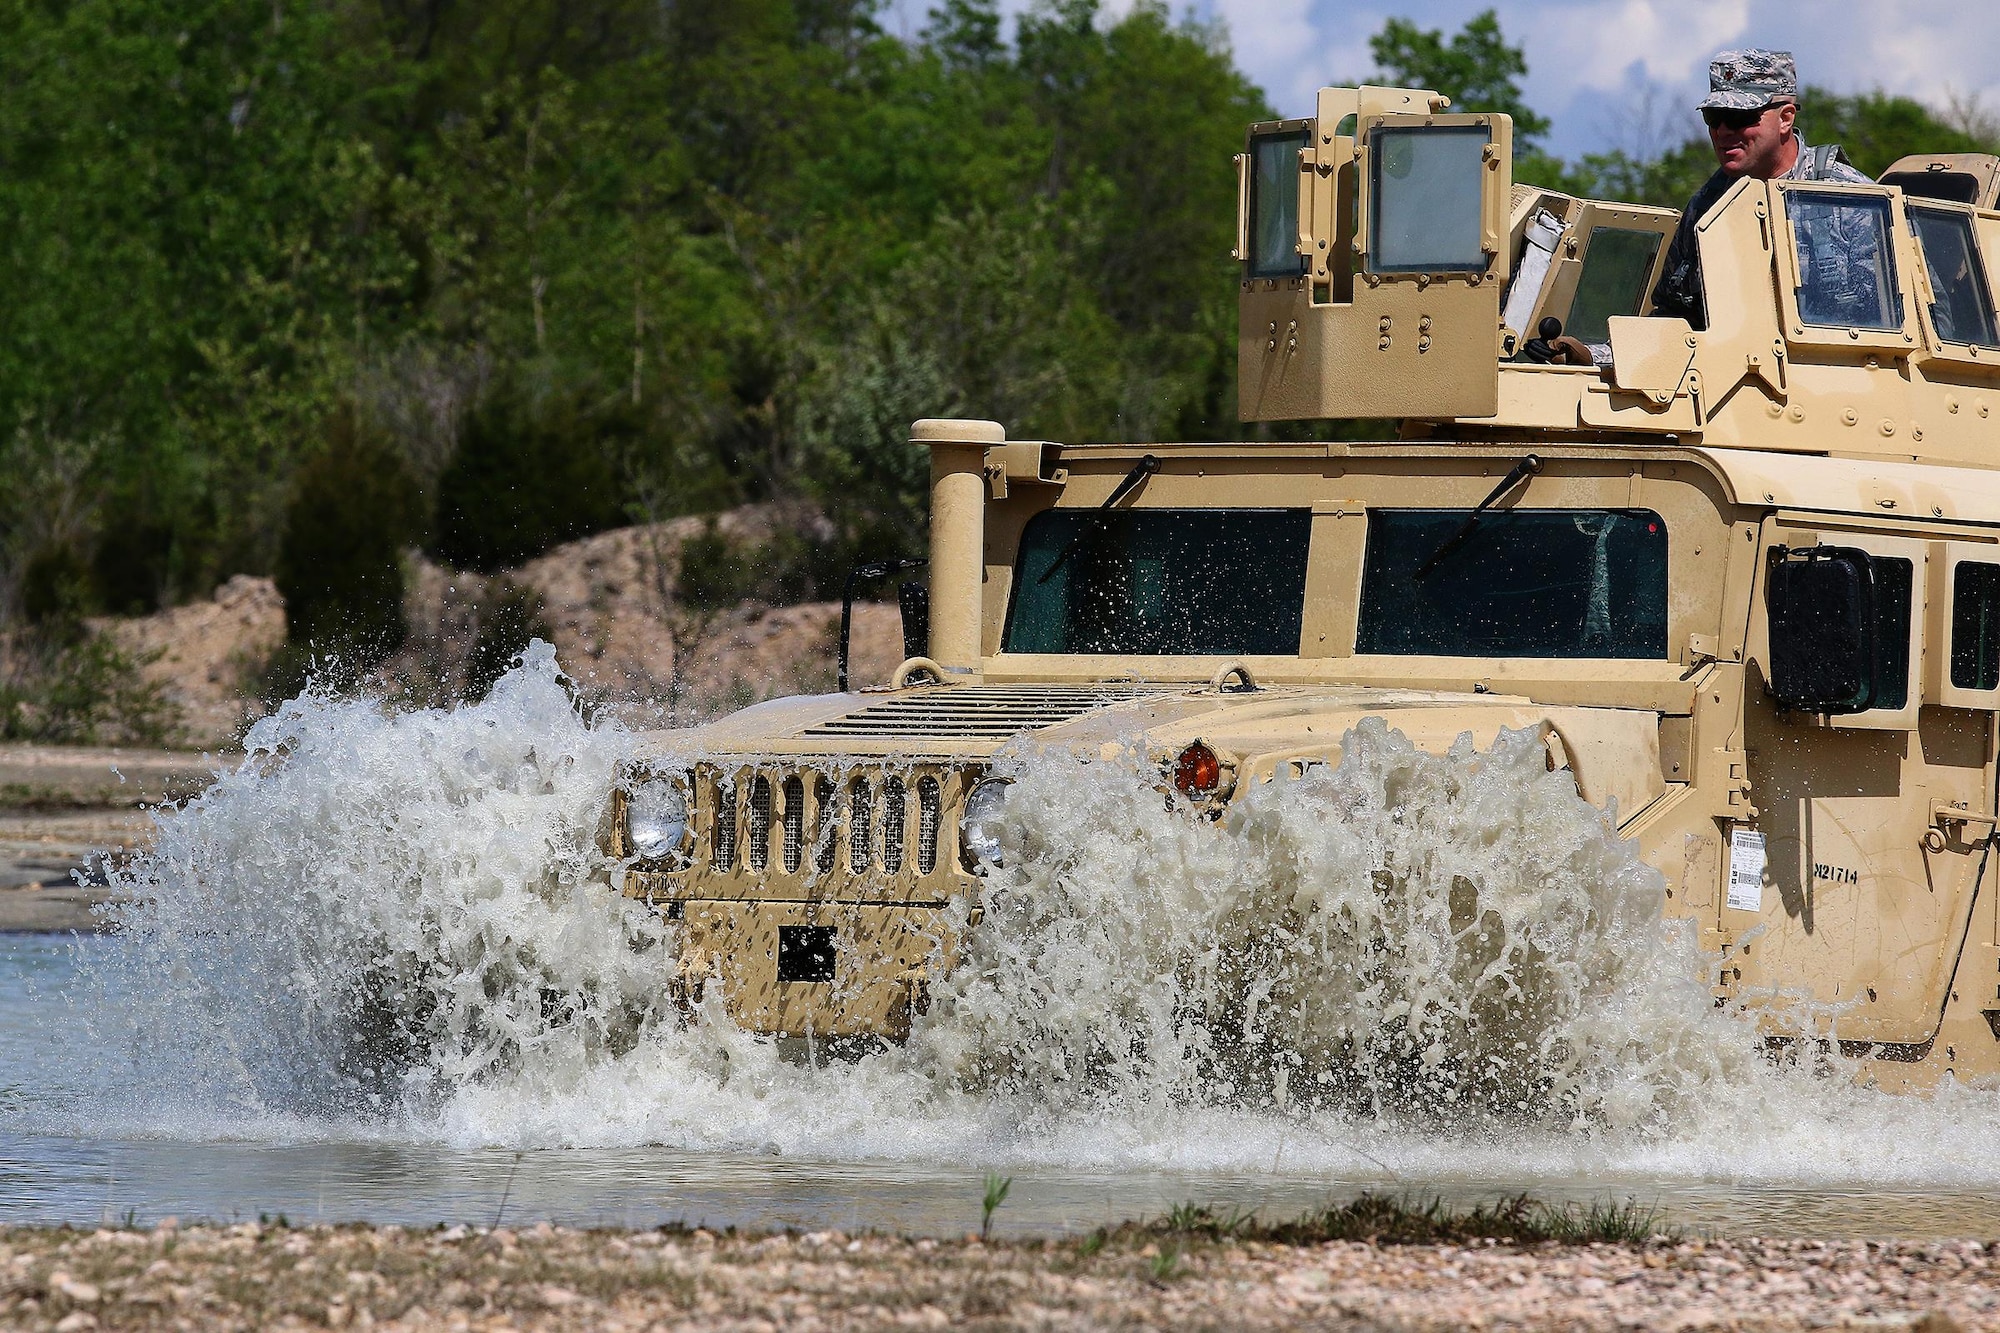 Airmen from the 445th Security Forces Squadron drive a Humvee through rugged terrain for training at the Oakes Quarry Park, Fairborn, Ohio May 6, 2017. The three-day expeditionary training consisted of several phases to include: Humvee mount/dismount, SERE, setting up/tear down tents, and night vision goggles. (U.S. Air Force photo /Tech. Sgt. Patrick O’Reilly)